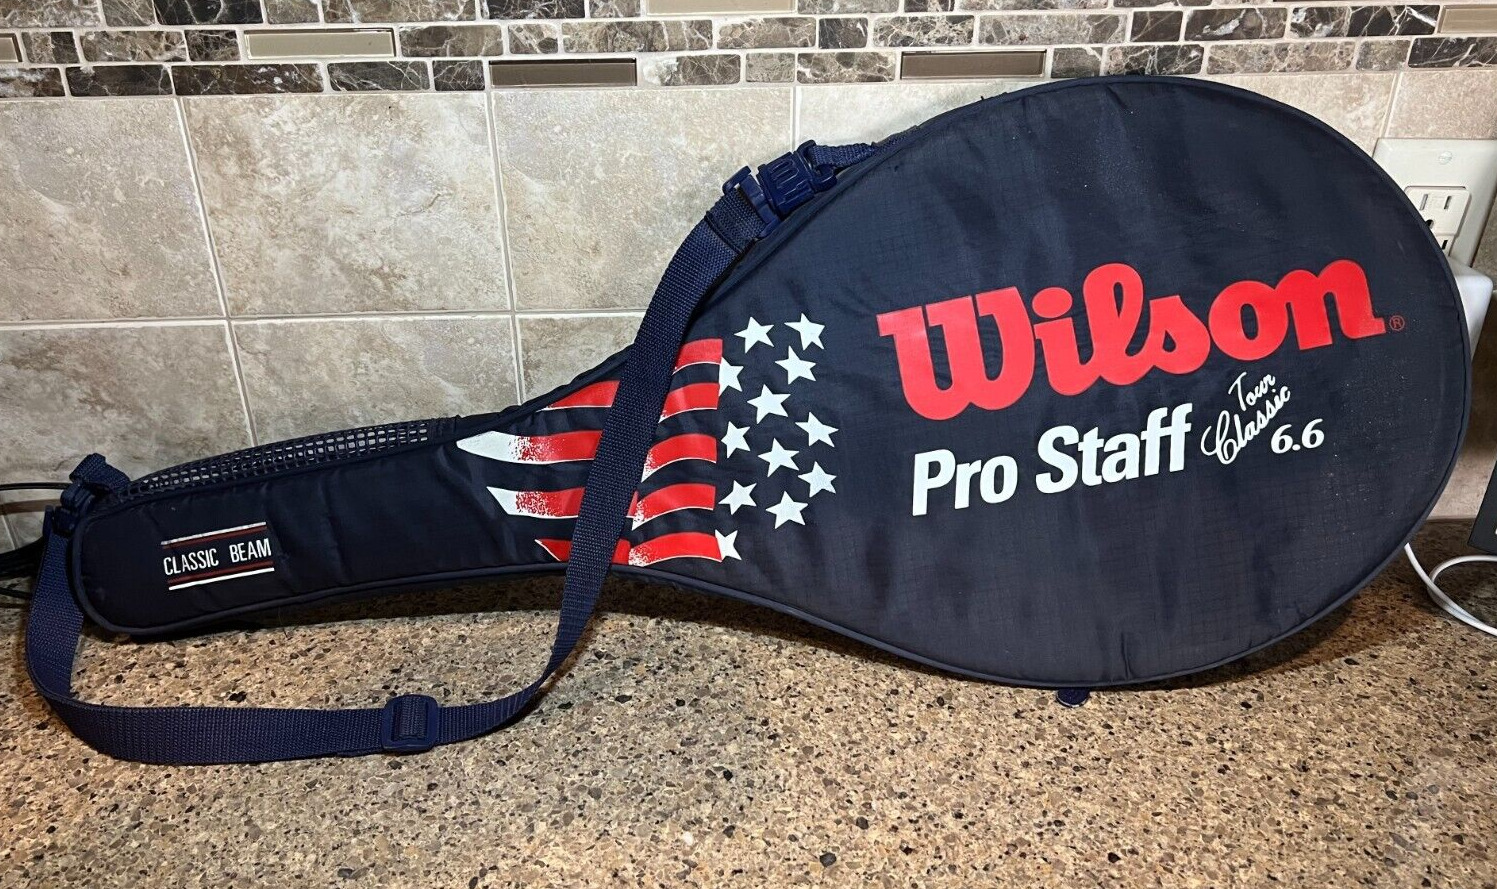 Wilson Pro Staff Classic Beam Tour Classic 6.6 Stars and Stripes Red/White/Blue